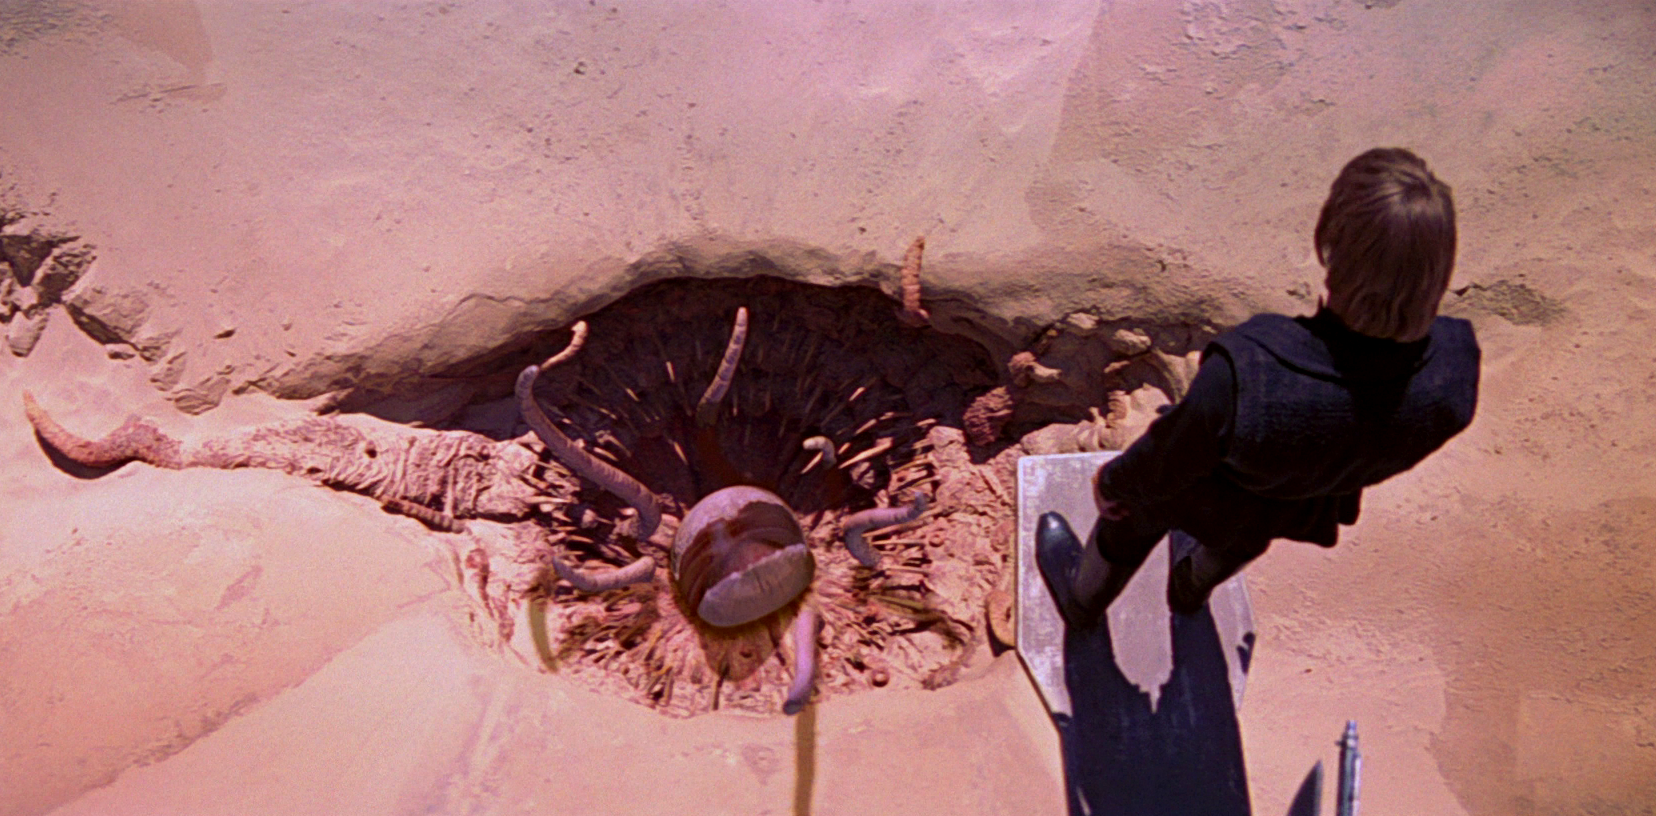 group-text-message-sarlacc-pit